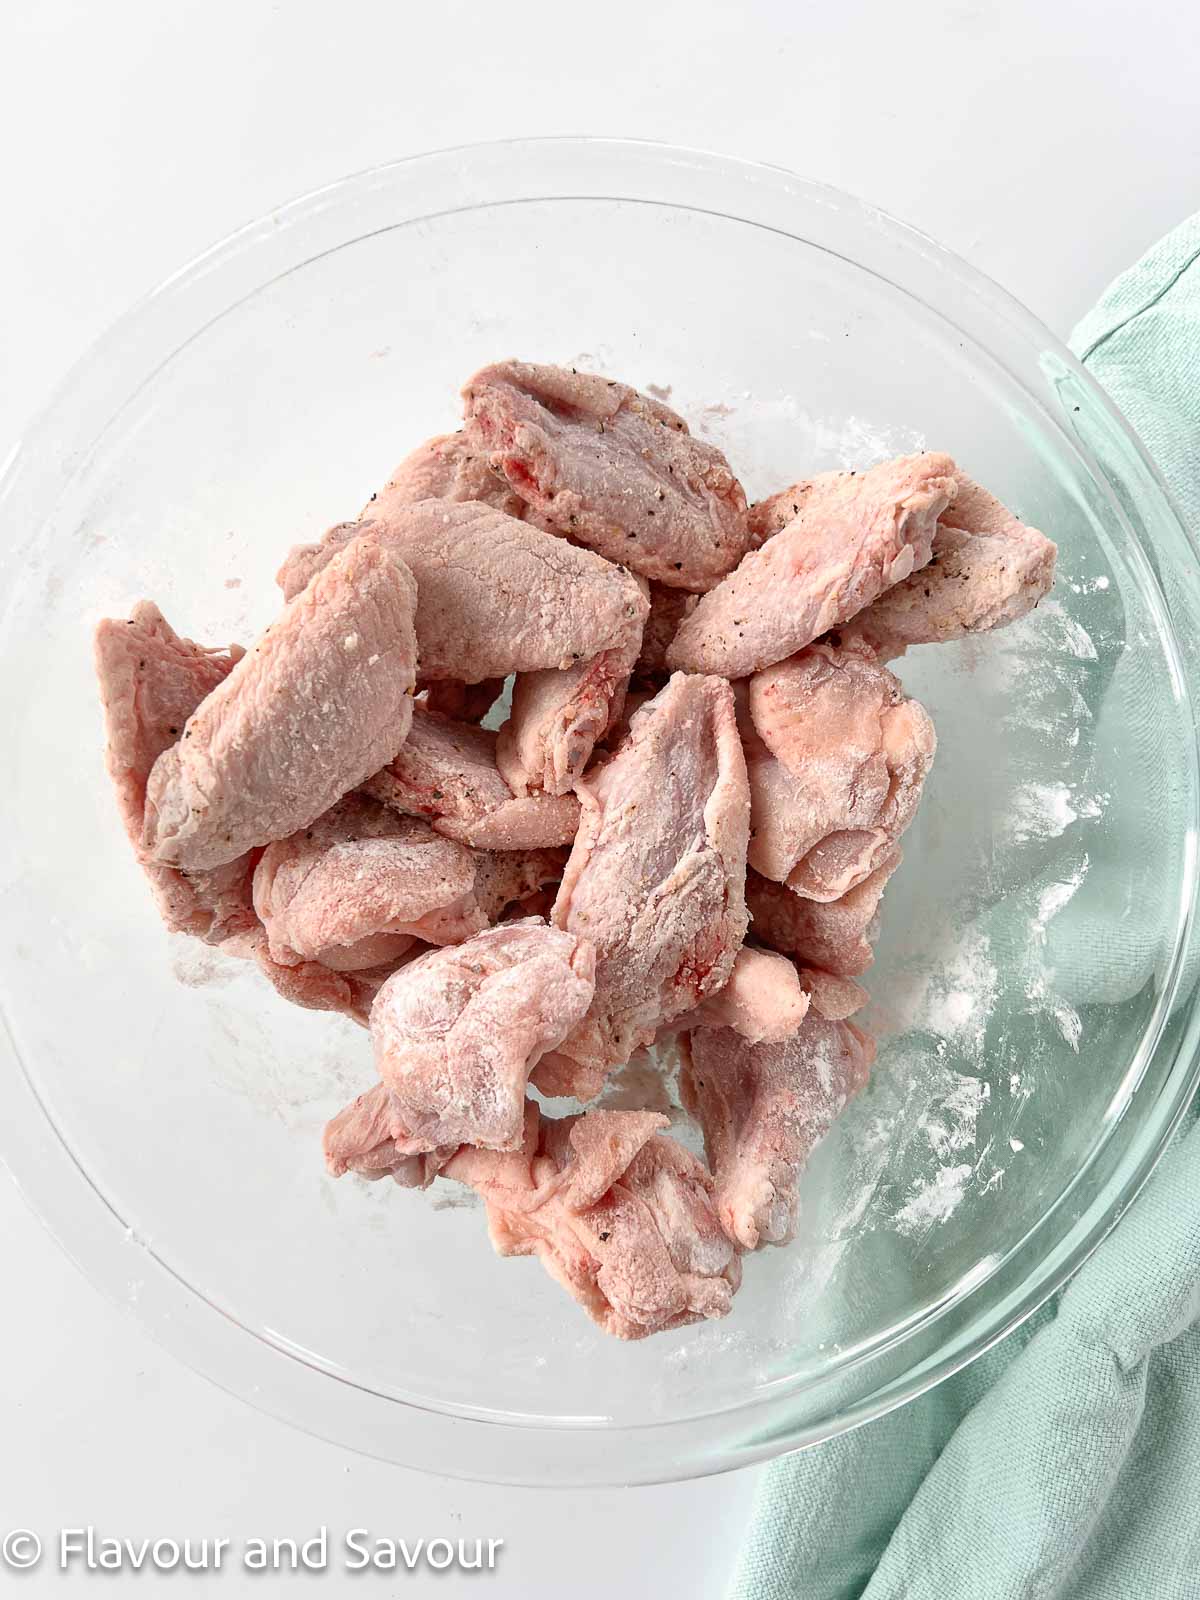 Raw chicken wings in a bowl tossed with baking powder, salt and pepper.